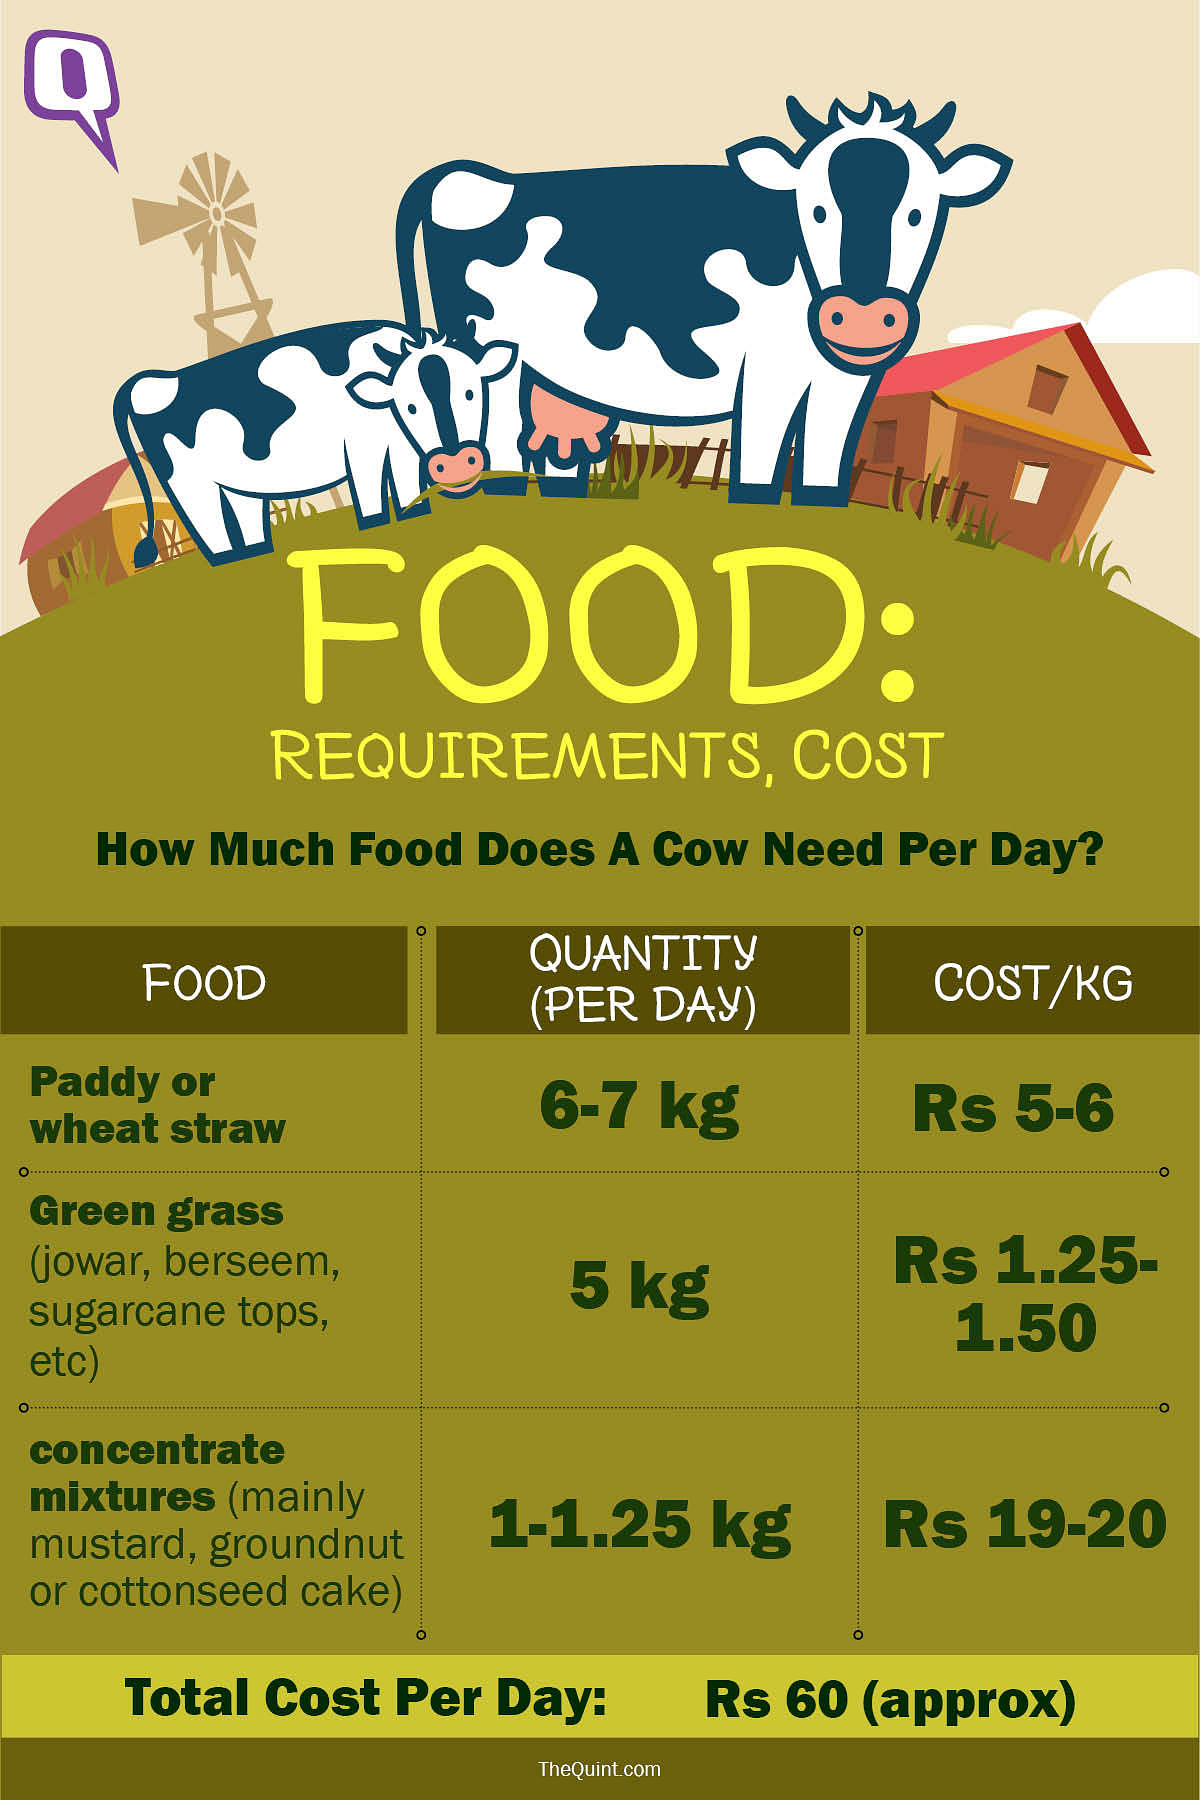 Here’s a realistic projection of how much India would have to spend if the cattle slaughter ban is imposed.